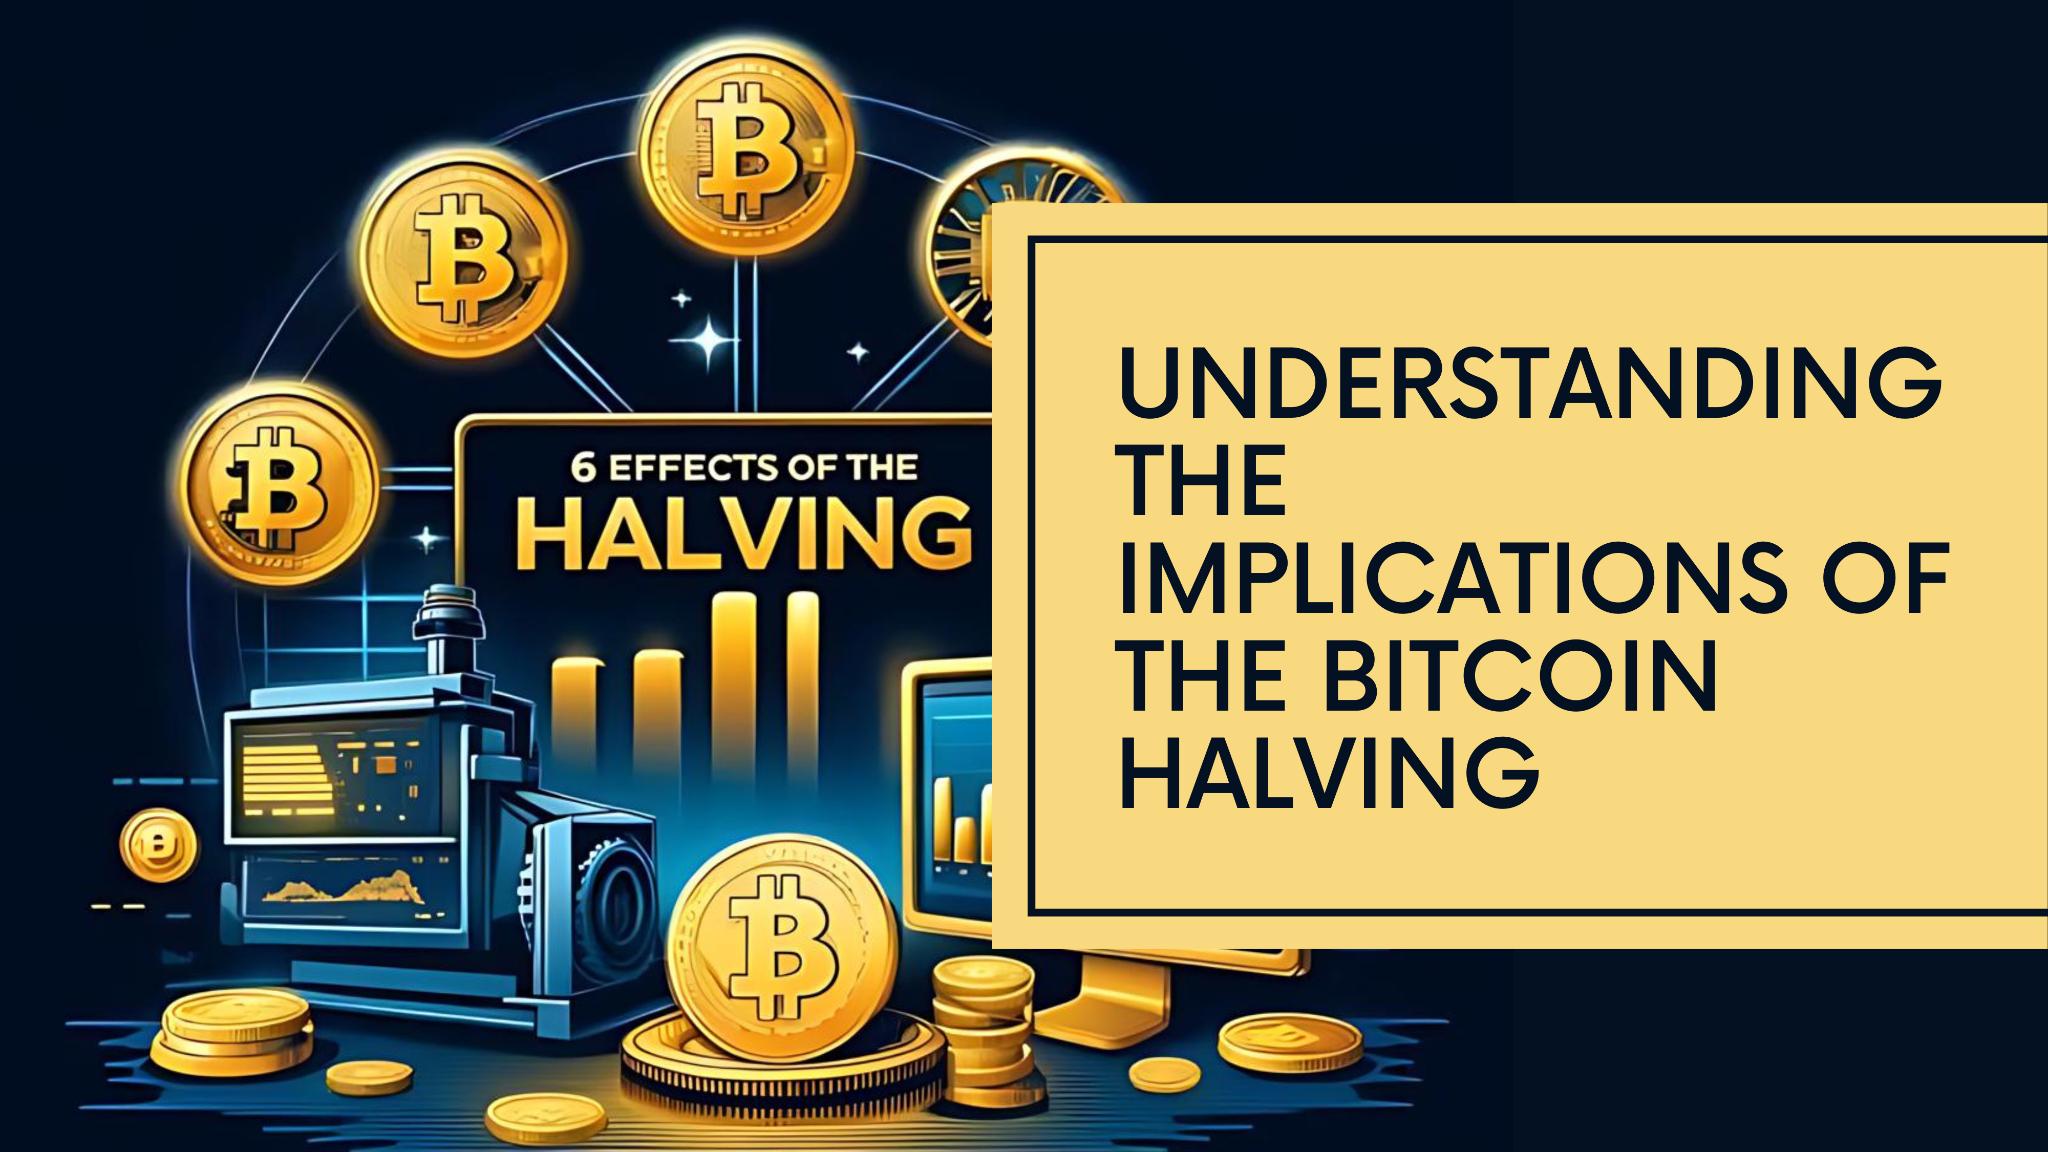 6 Effects of Halving on Bitcoin Mining. image